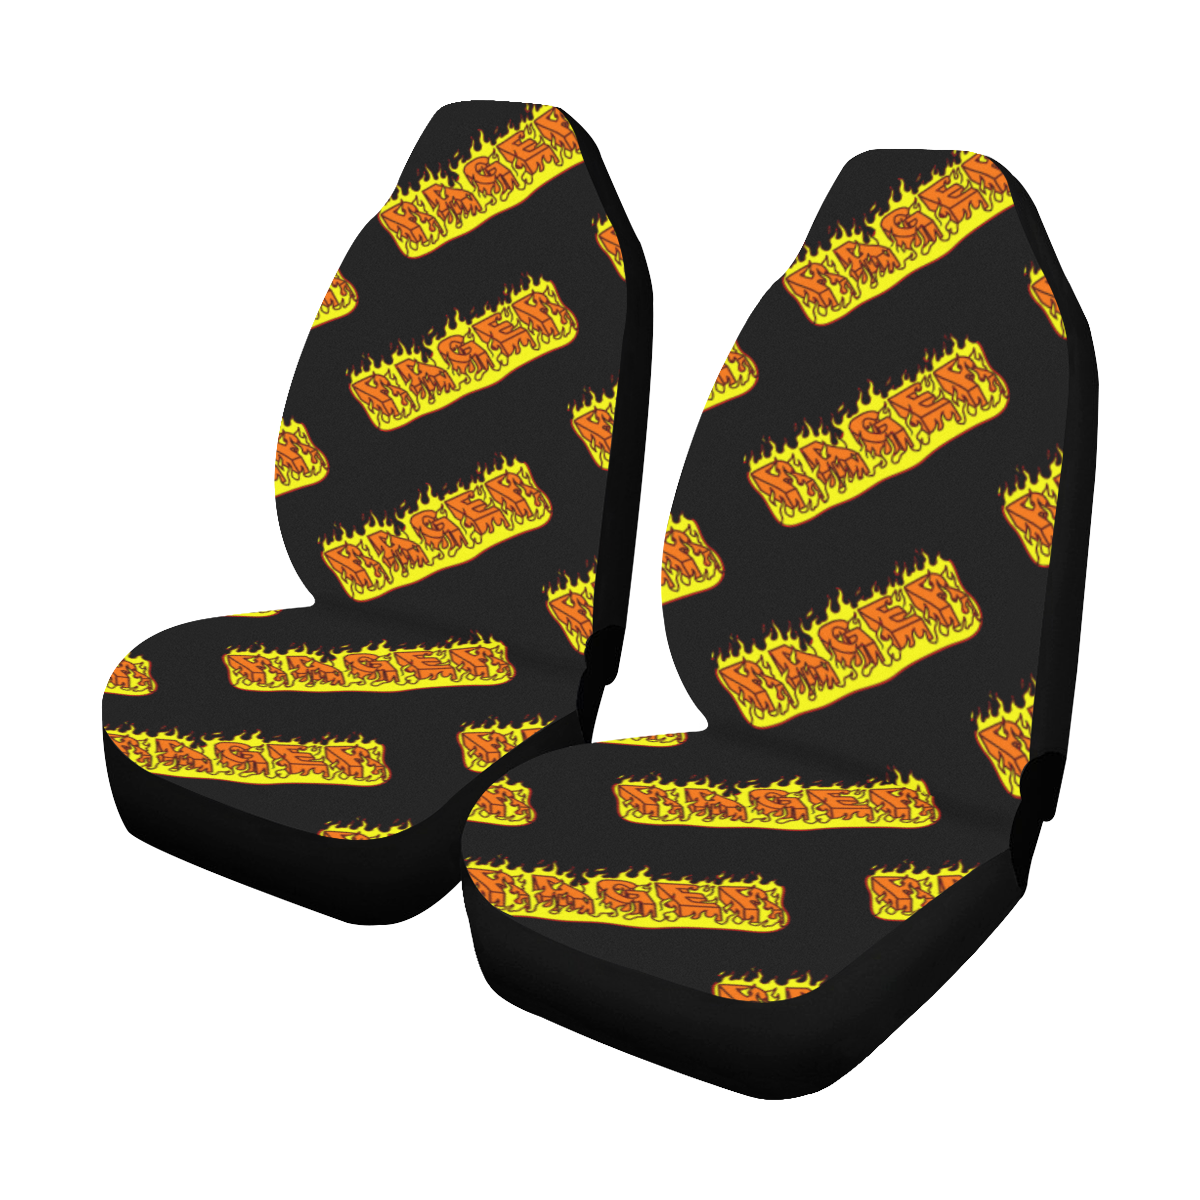 RAGER HELL ALL OVER black Car Seat Covers (Set of 2)